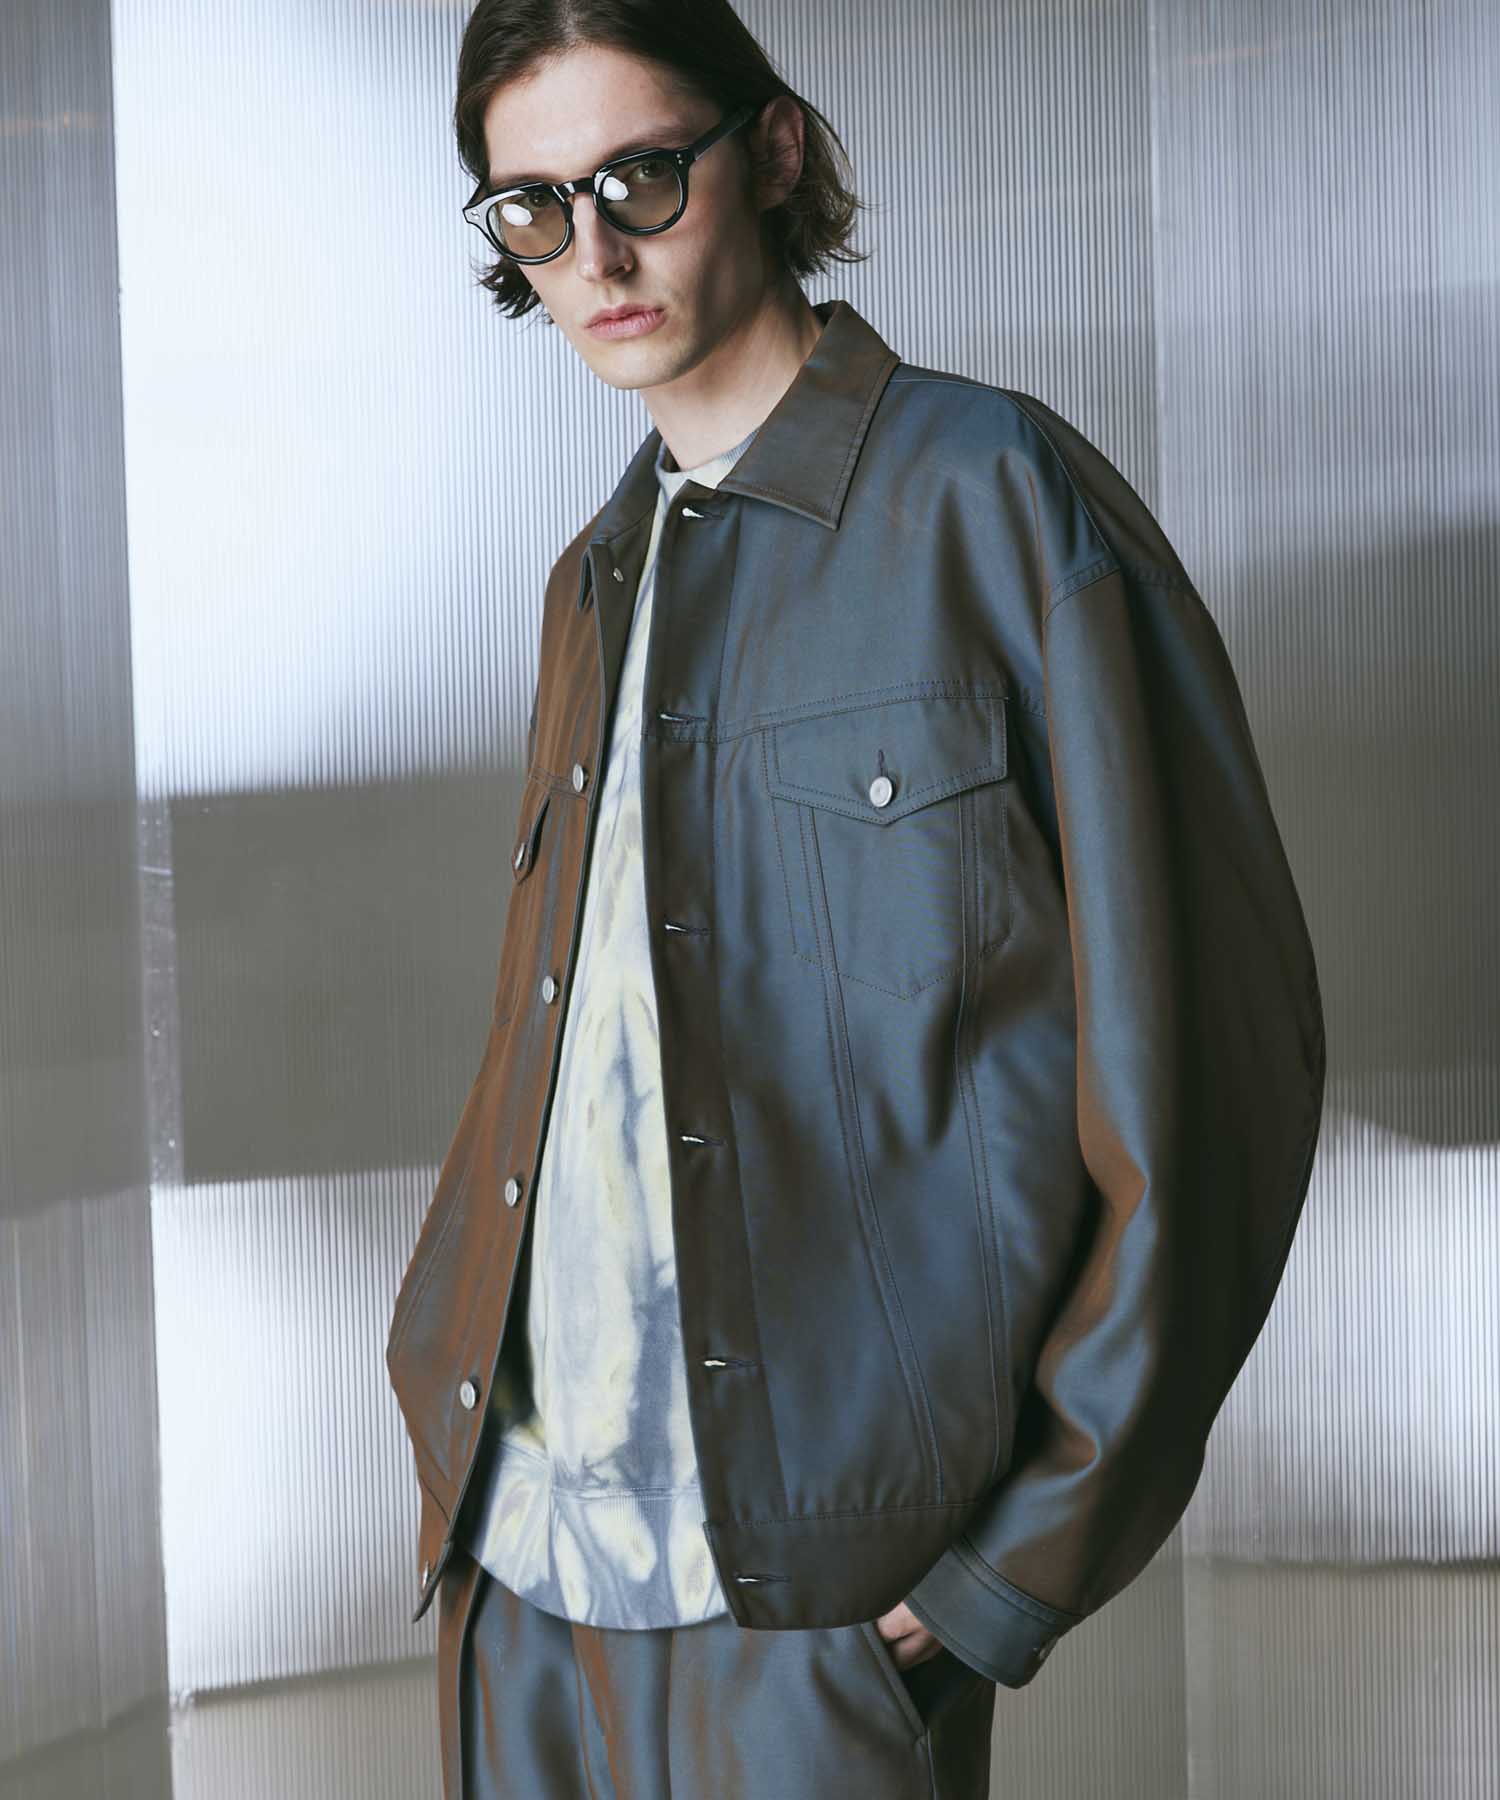 Lyocell Twill Chambray Prime-Over 3rd Jacket